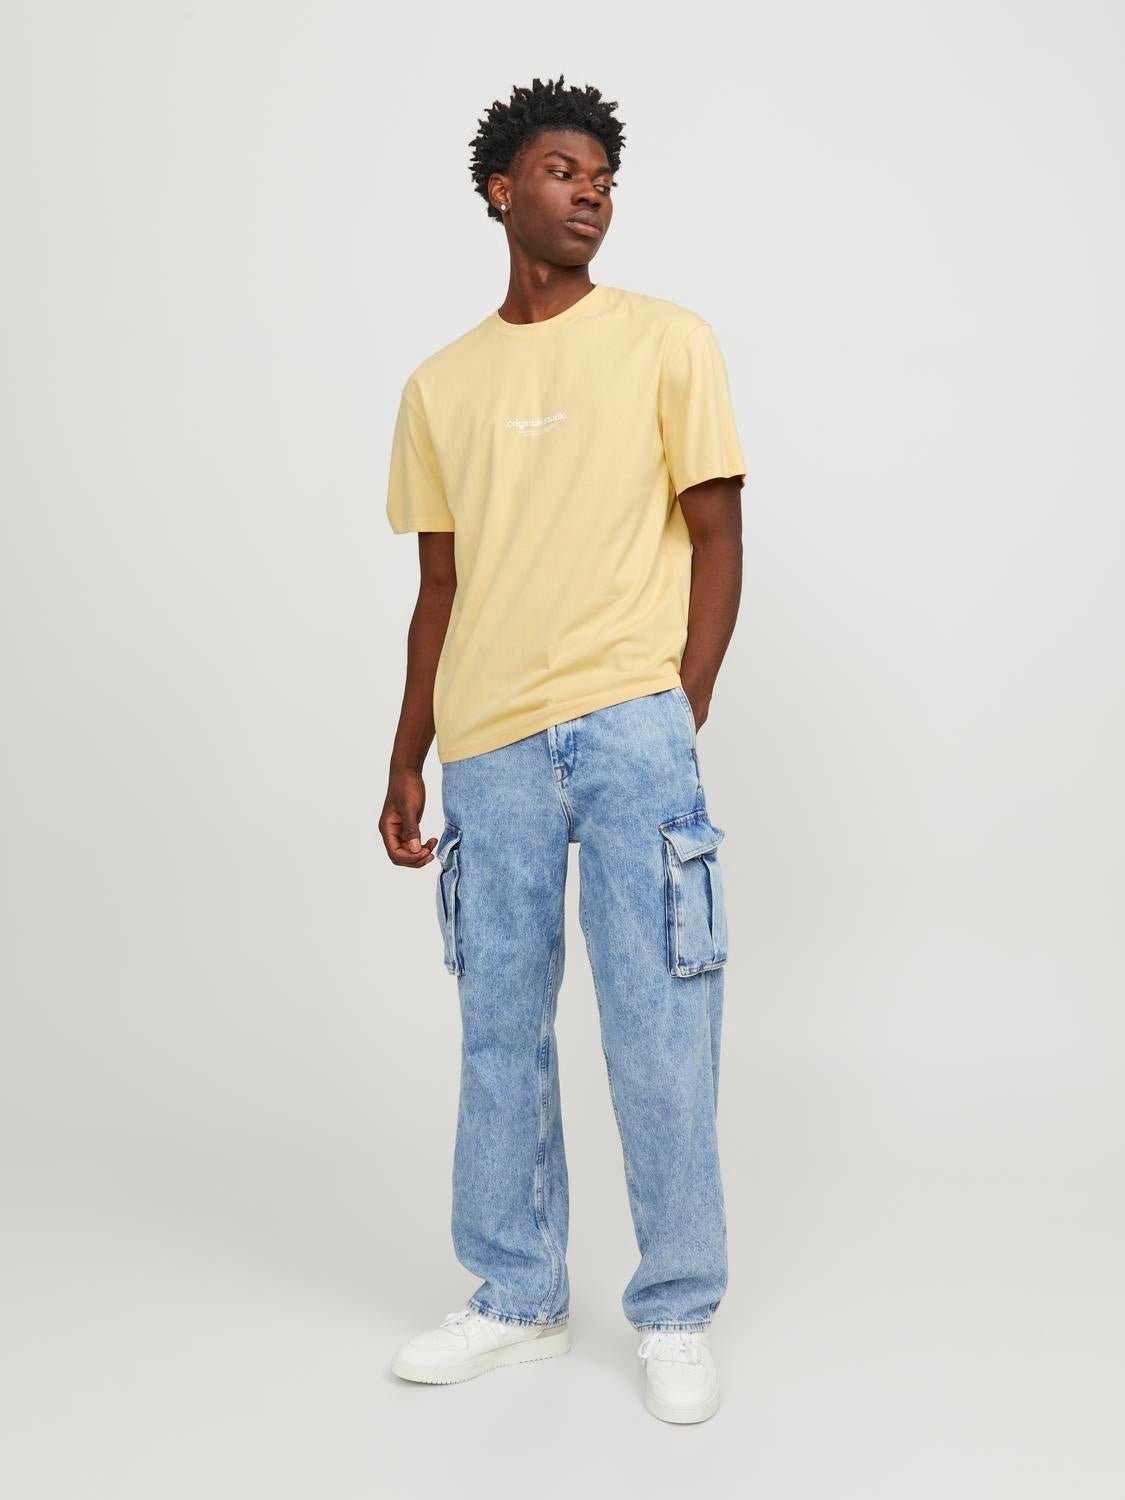 Check styling ideas for「Oversized Striped Half-Sleeve T-Shirt、Baggy Jeans」|  UNIQLO US